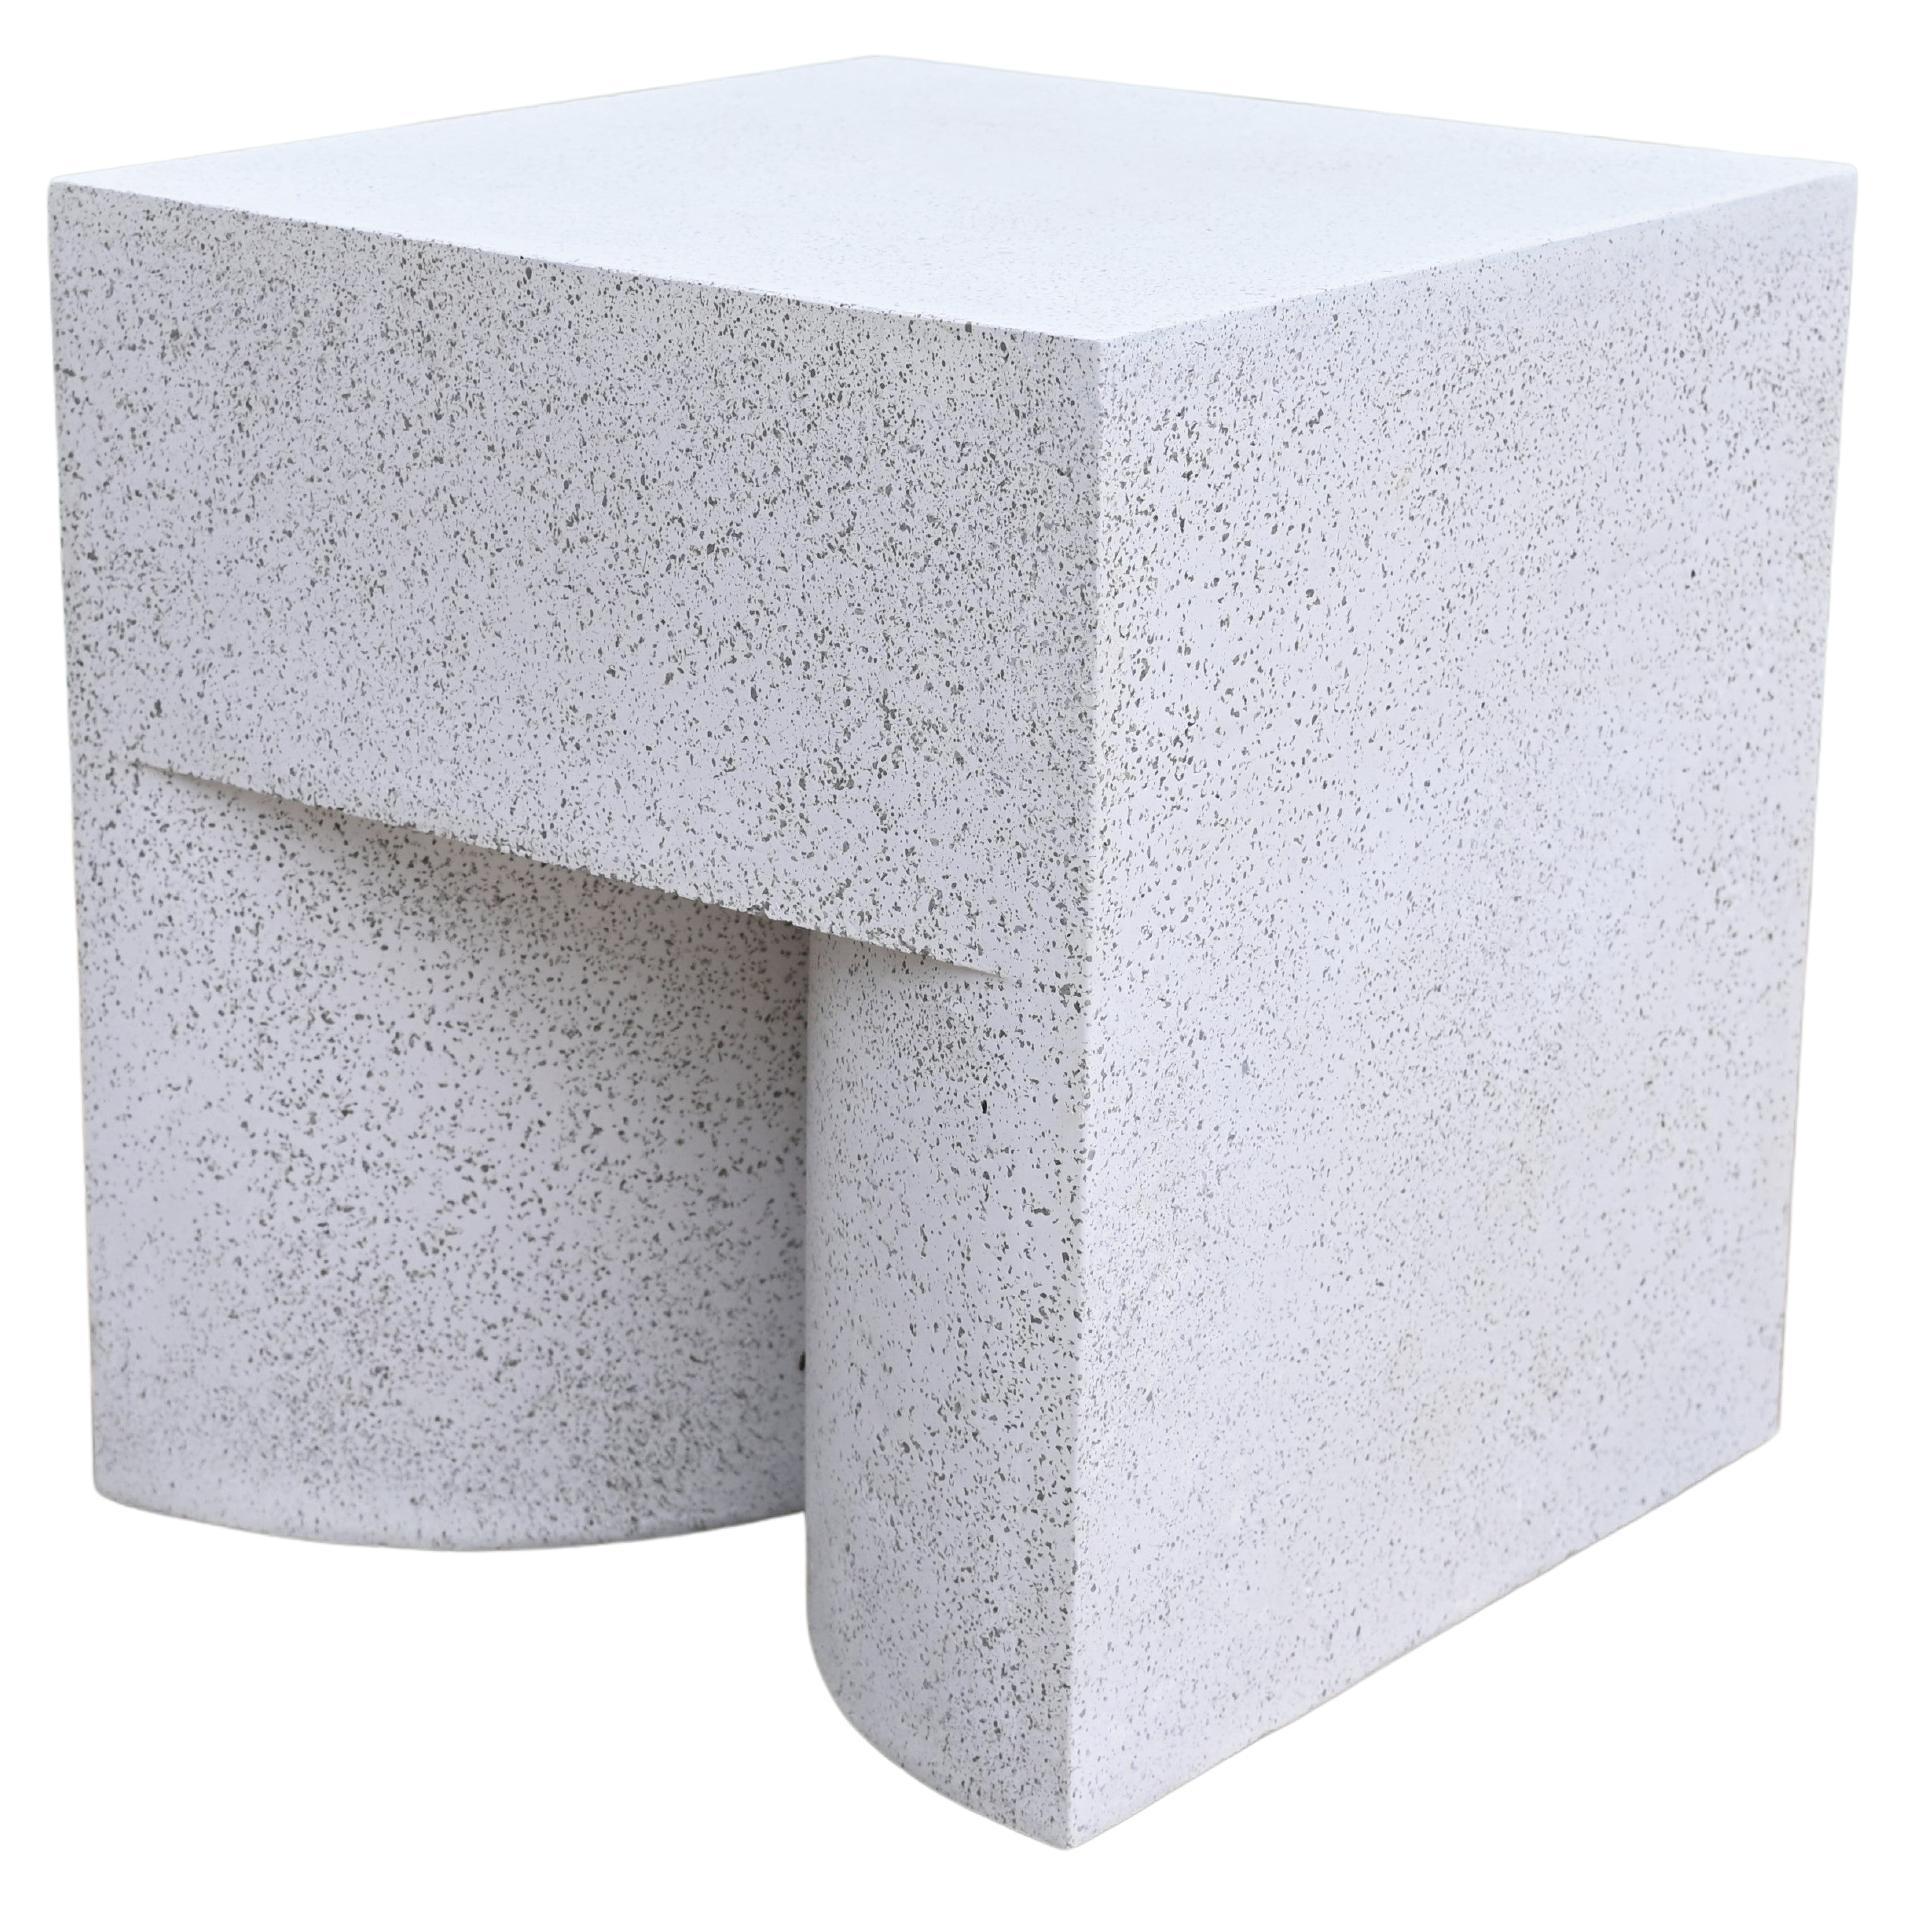 Cast Resin 'Middle Brow' Table, Natural Stone Finish by Zachary A. Design For Sale